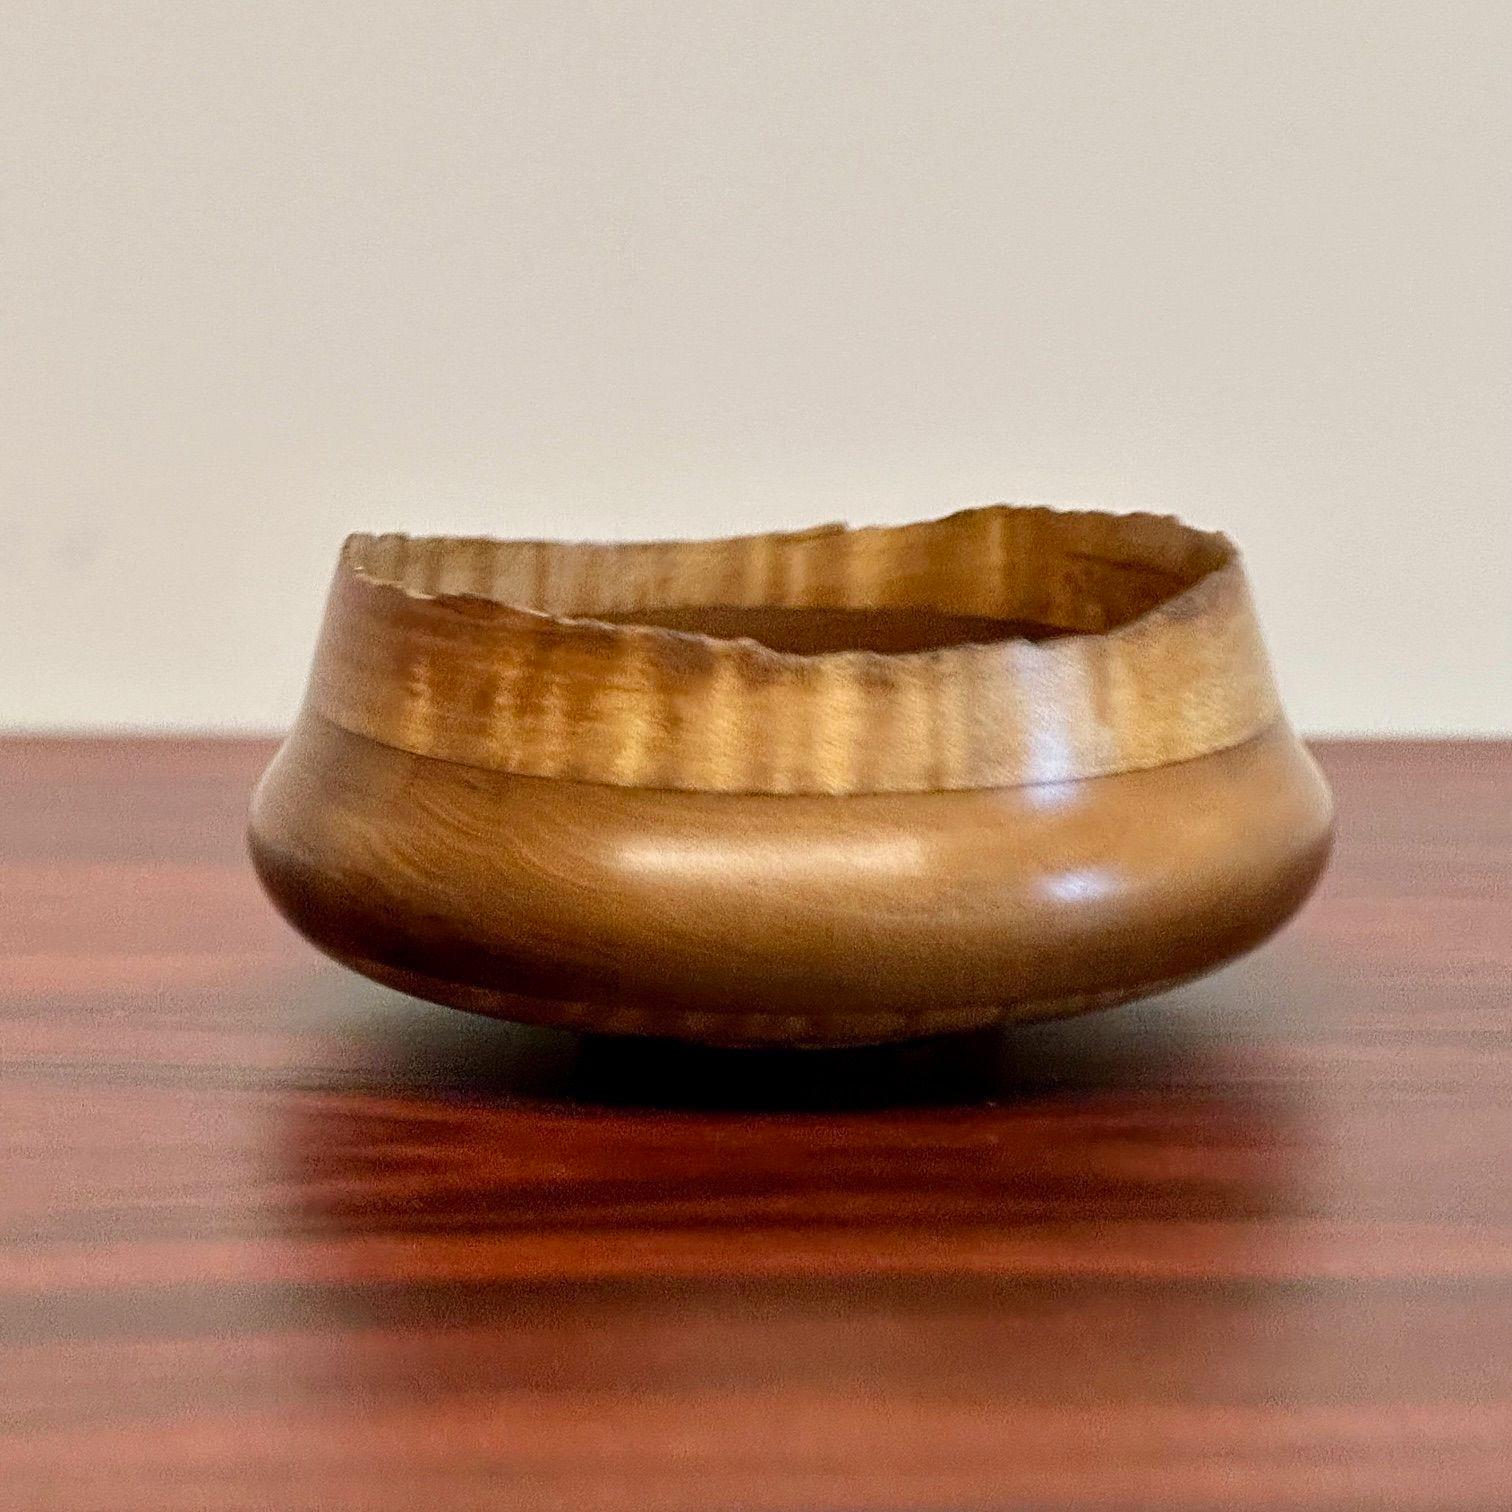 American Small Mid-Century Modern Artisan Studio Made Bowl / Vessel, Tableware, Signed For Sale